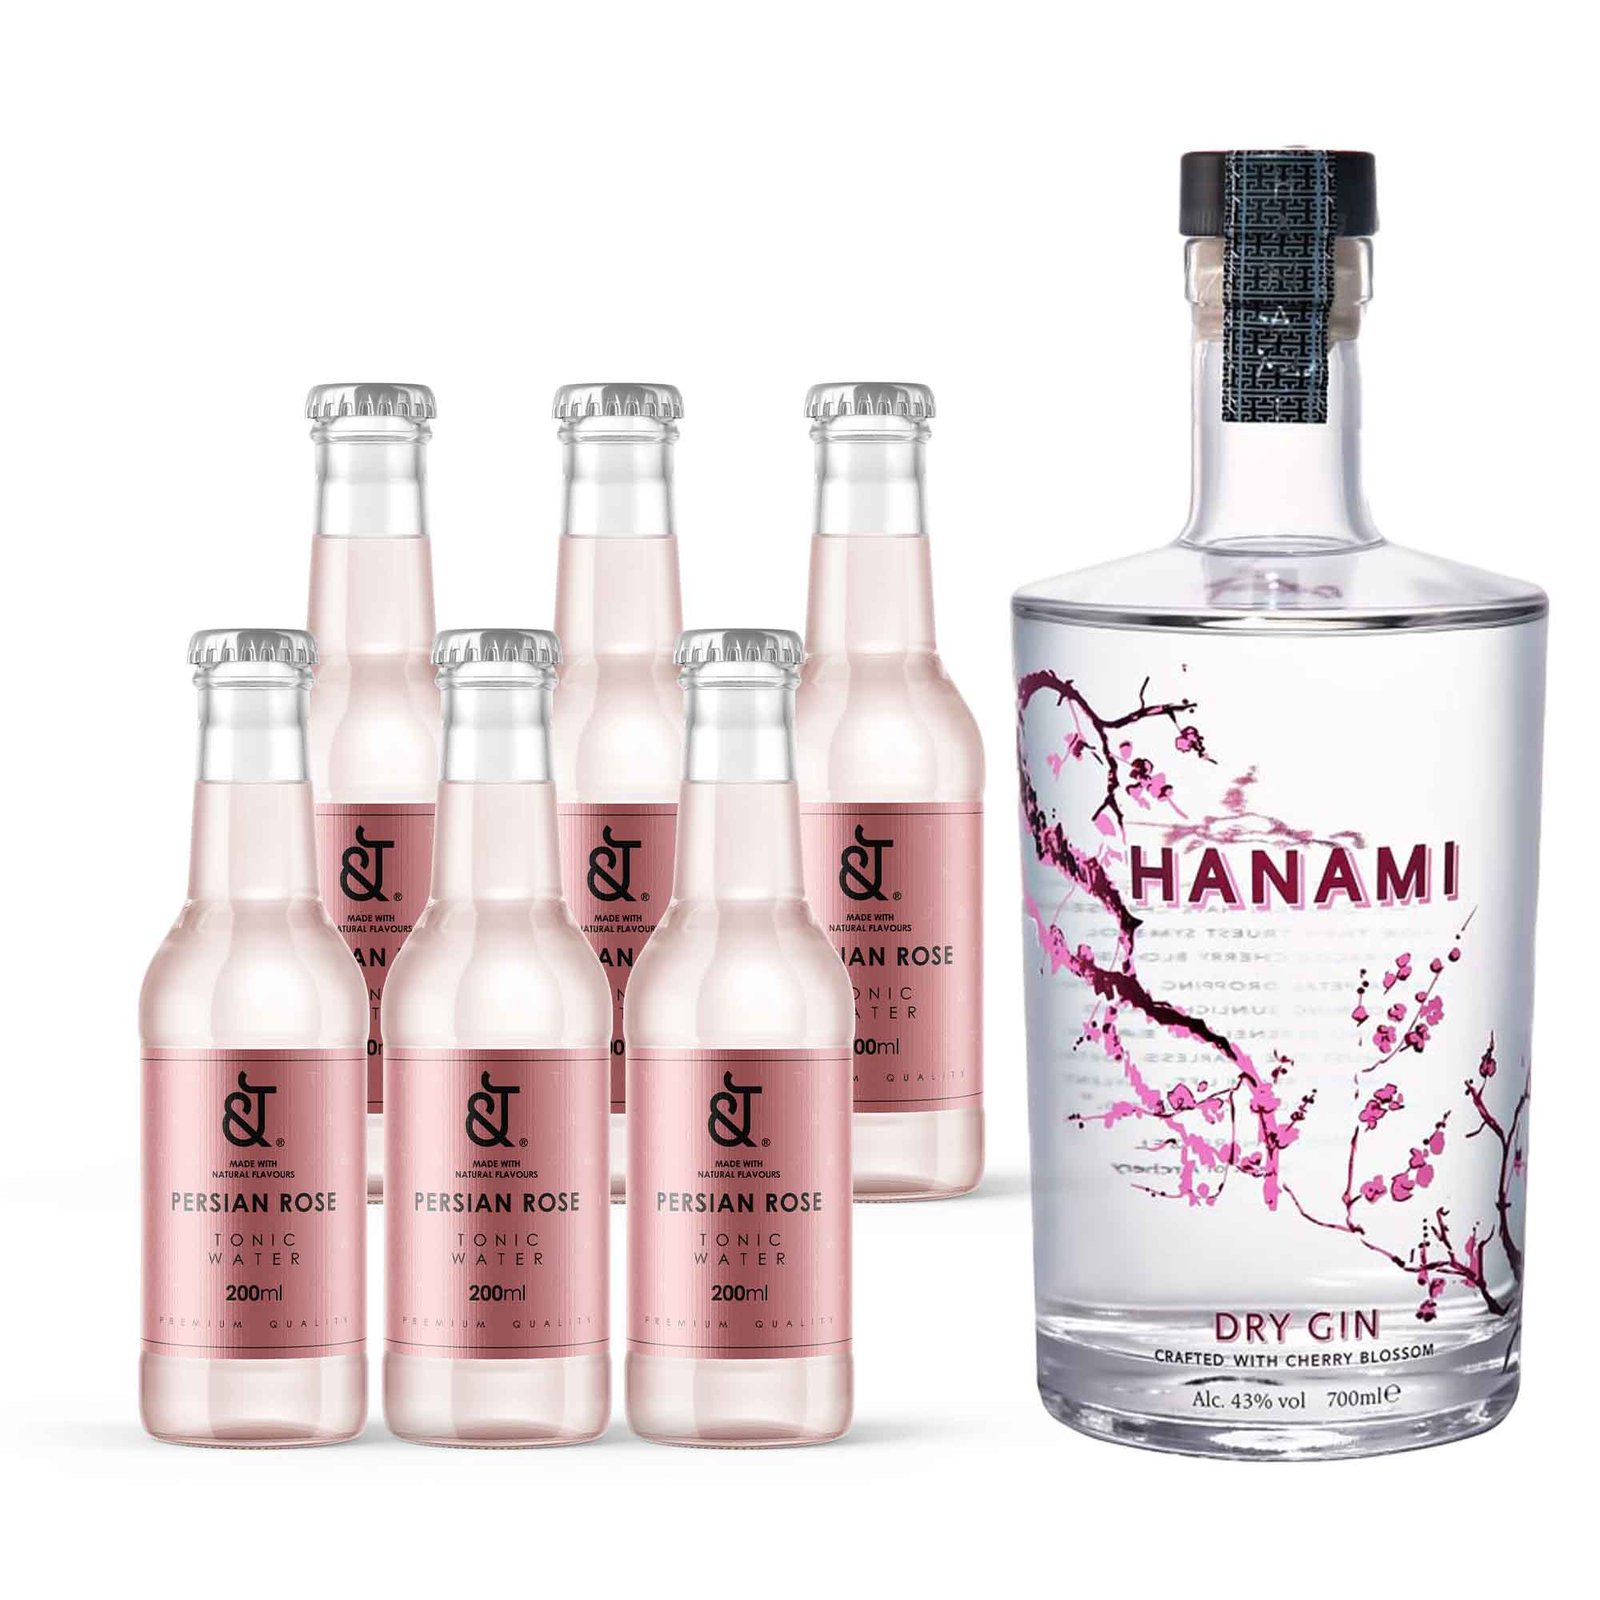 PRIVATE LABLE DRY GIN HANAMI